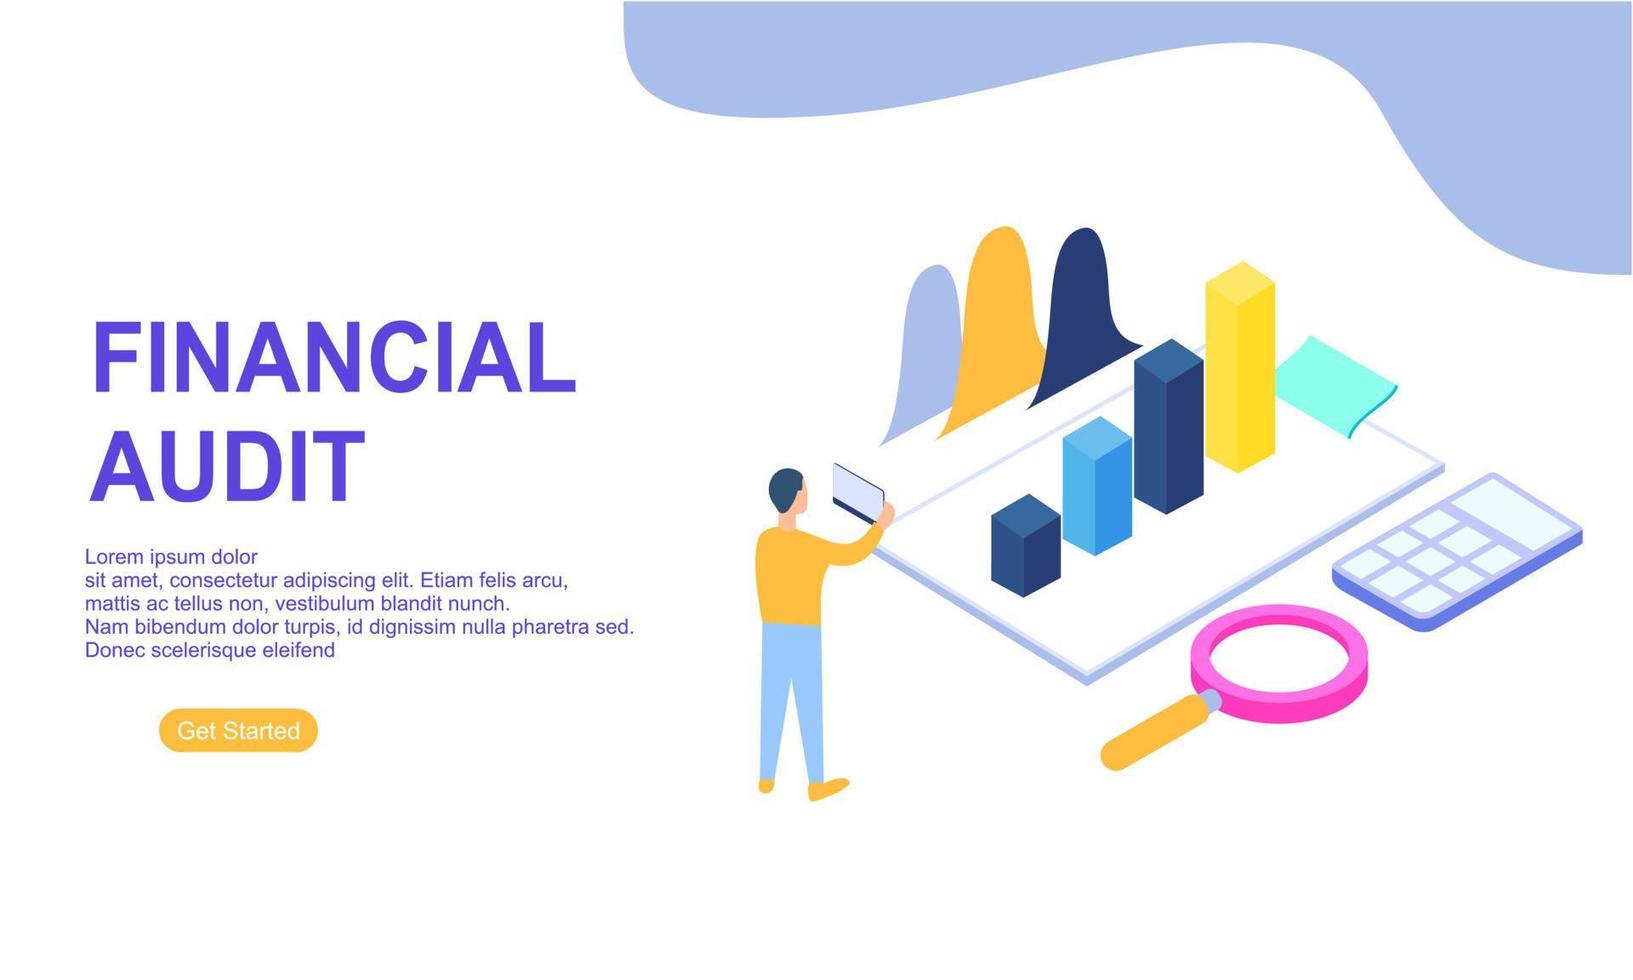 Financial audit business concept with character for website landing page vector